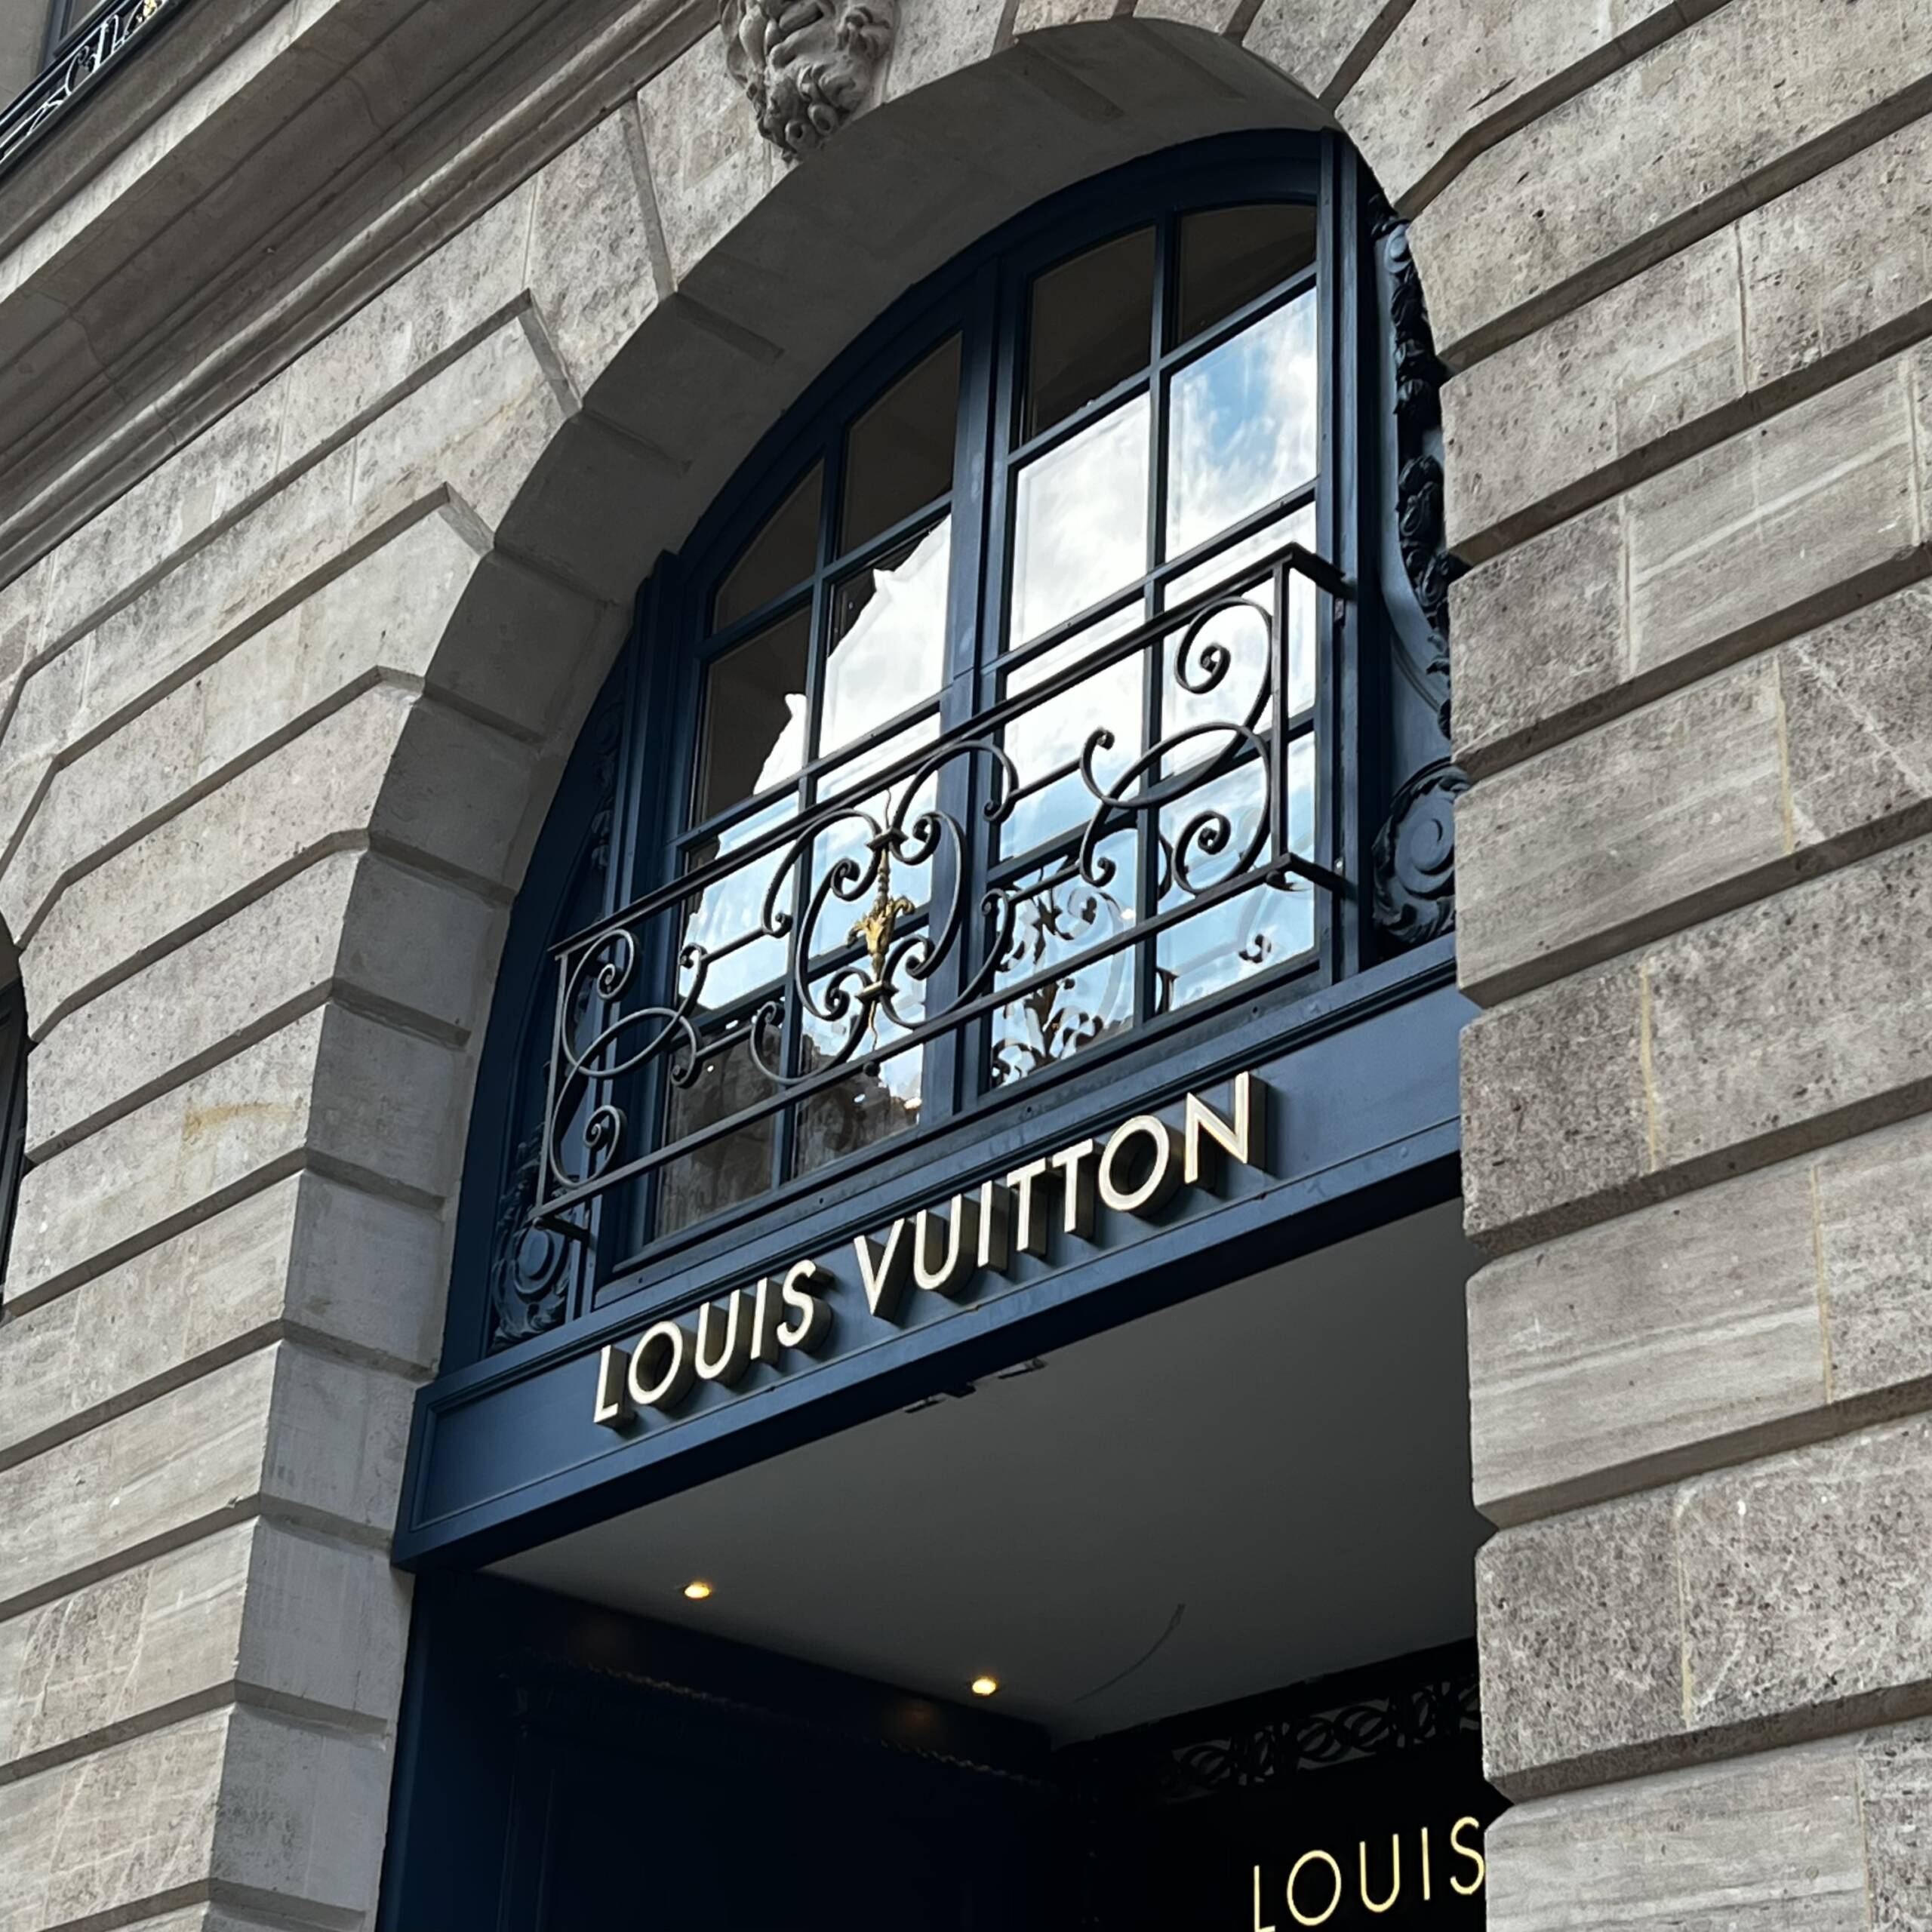 What inflation? People can't stop buying Louis Vuitton bags